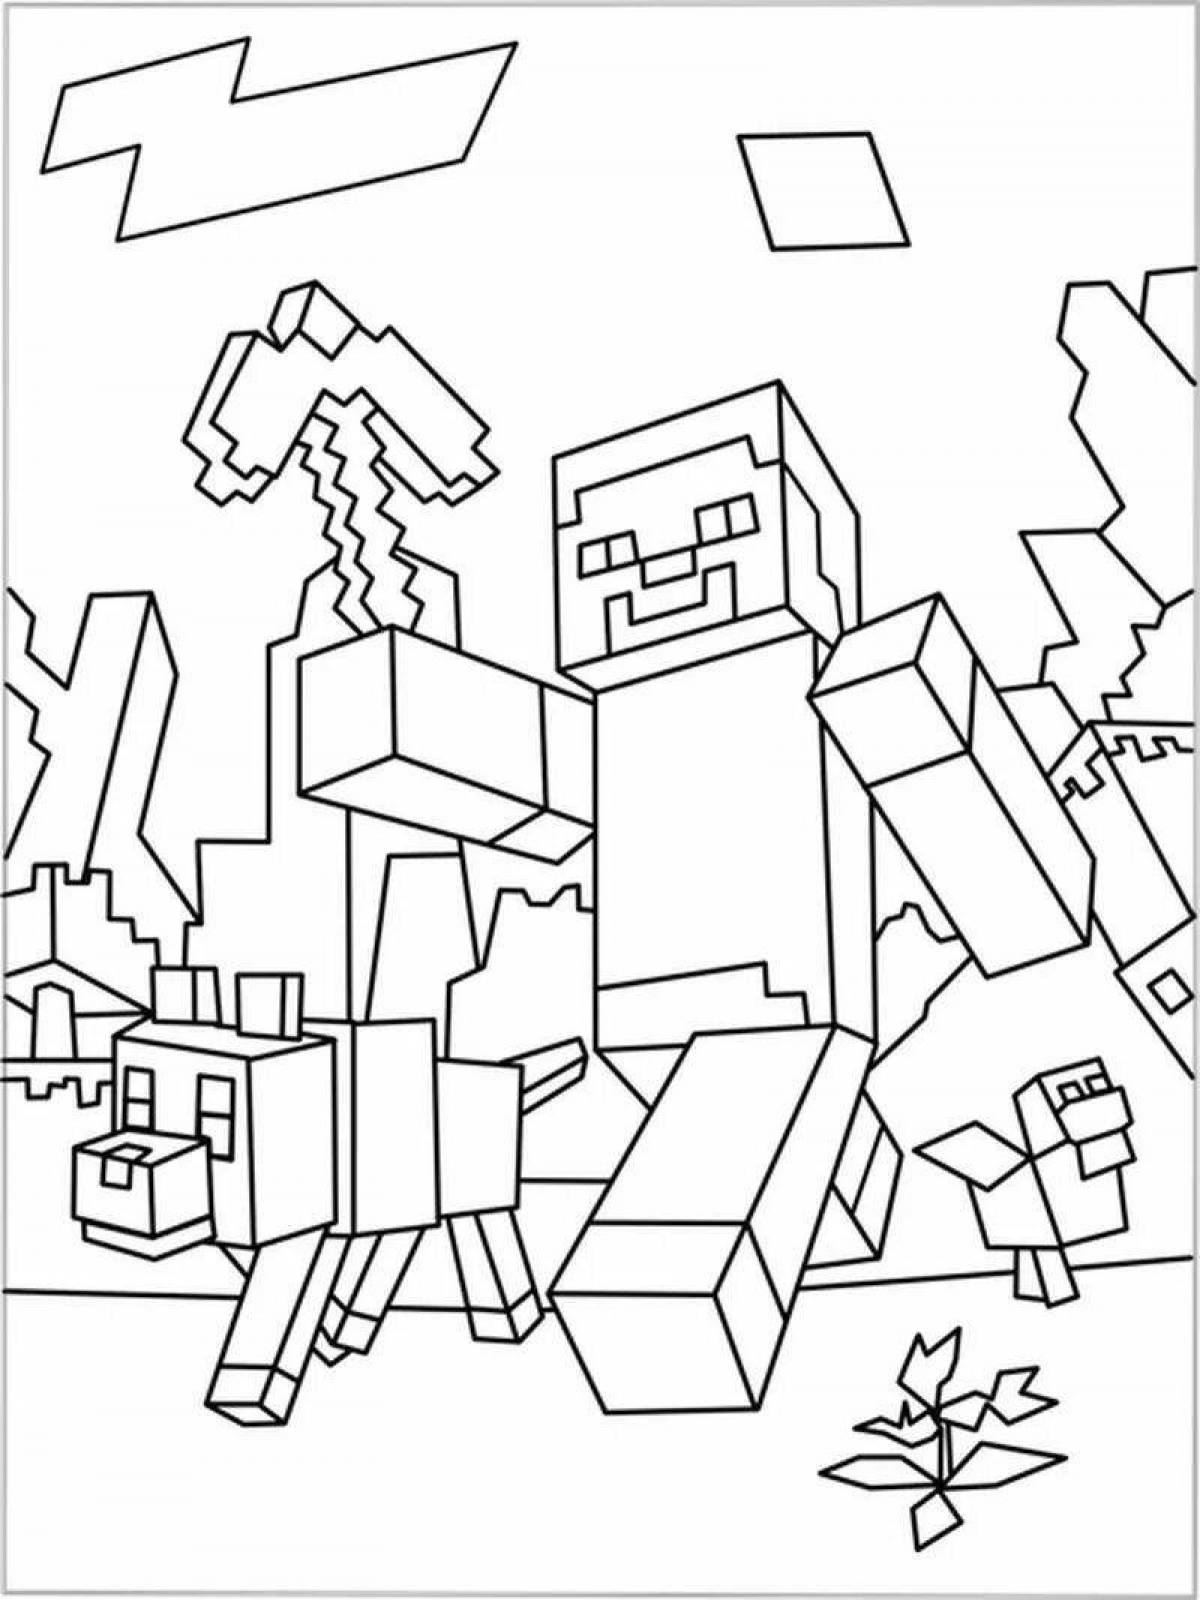 Calming minecraft antistress coloring page